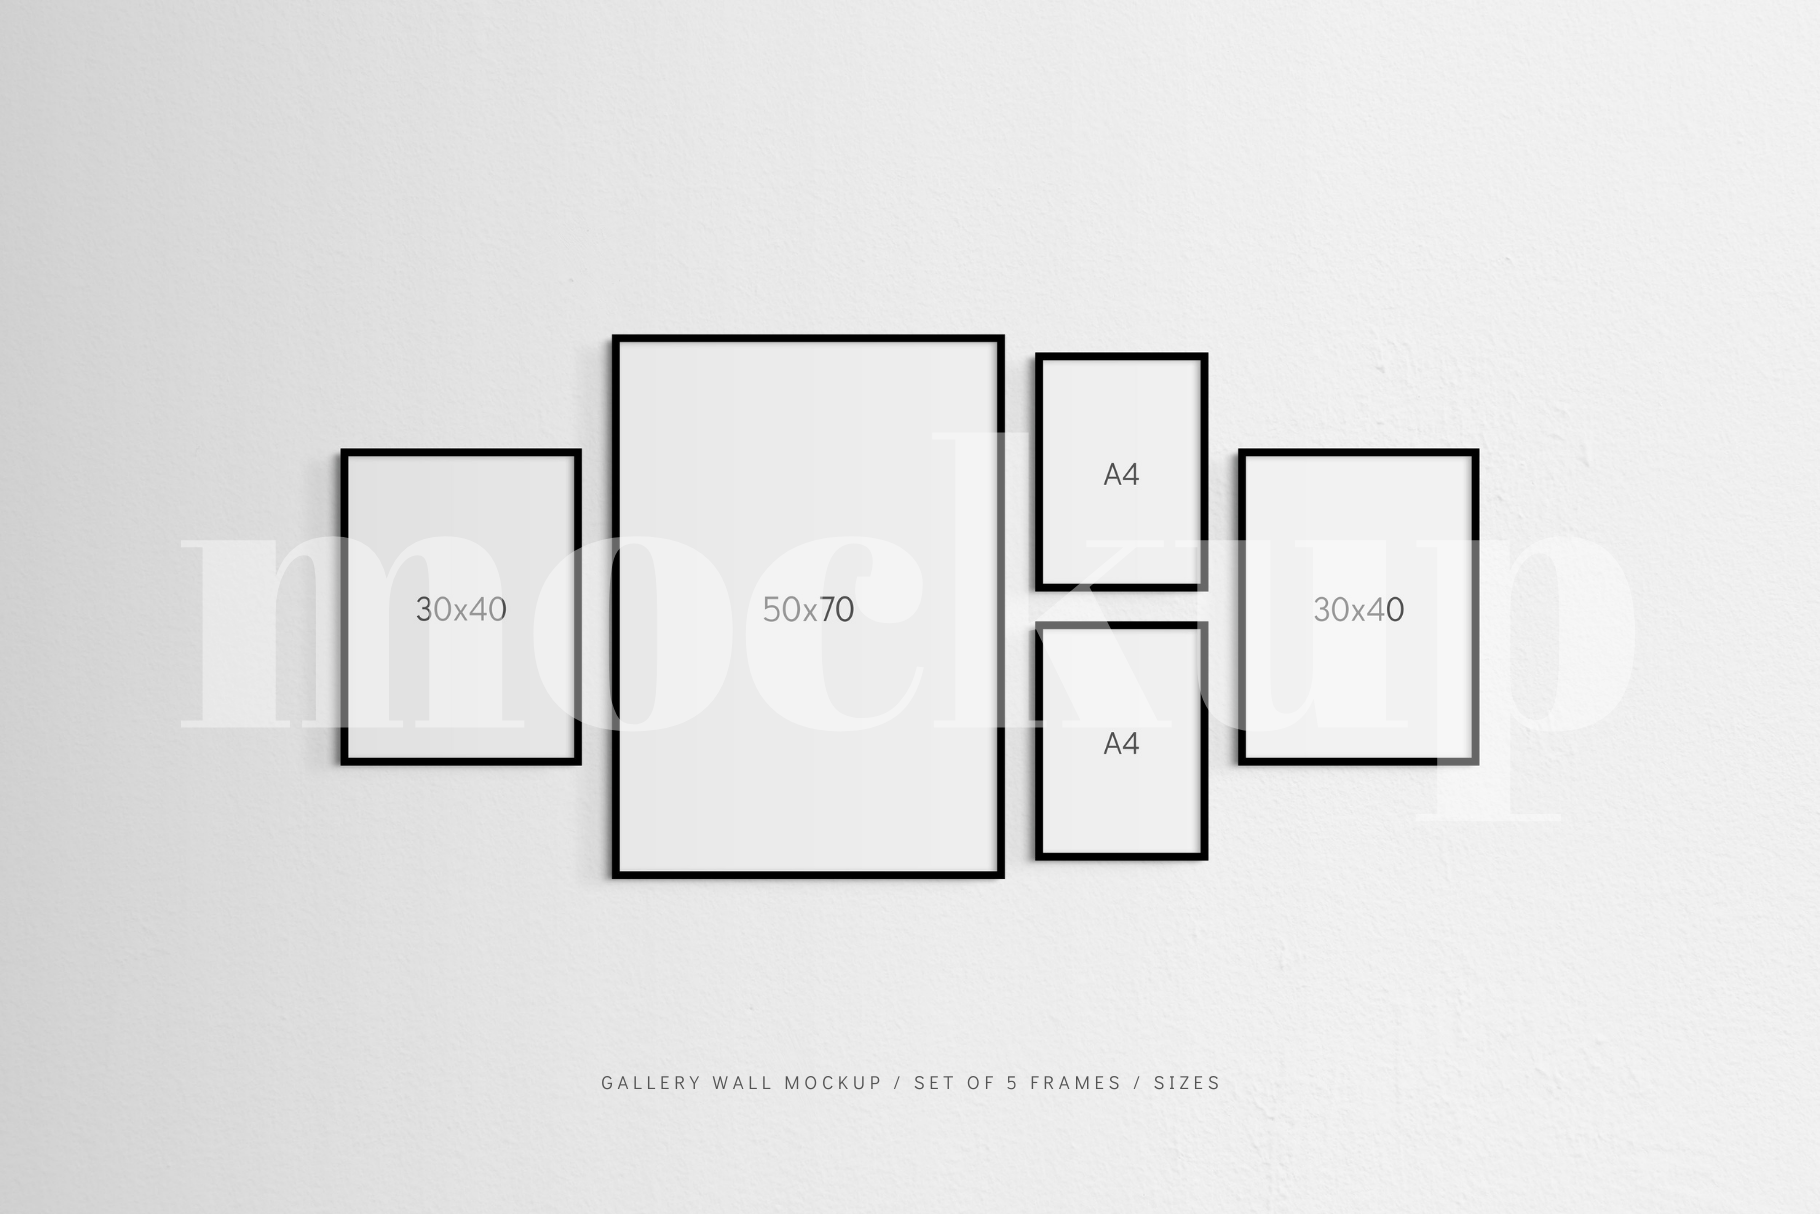 A modern, minimalist gallery wall frame mockup that features a set of 5 vertical black frames.